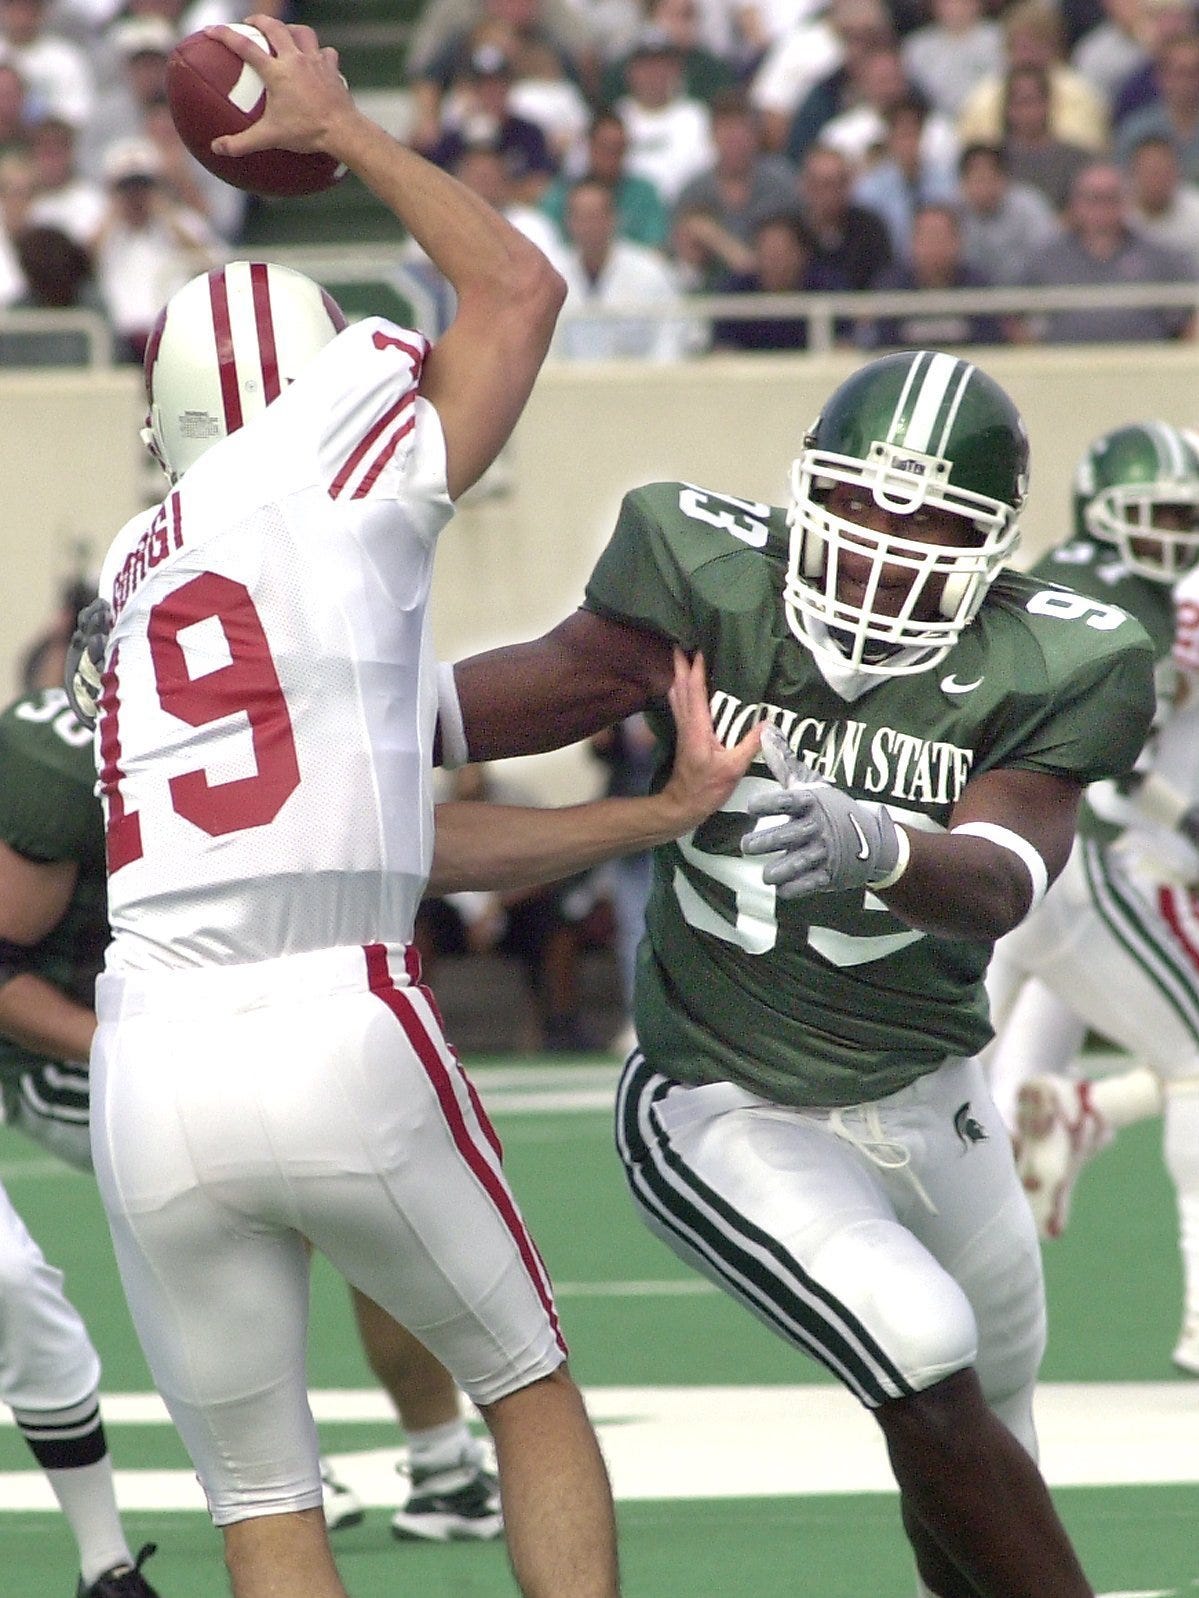 Who wore it best' at Michigan State: No. 93